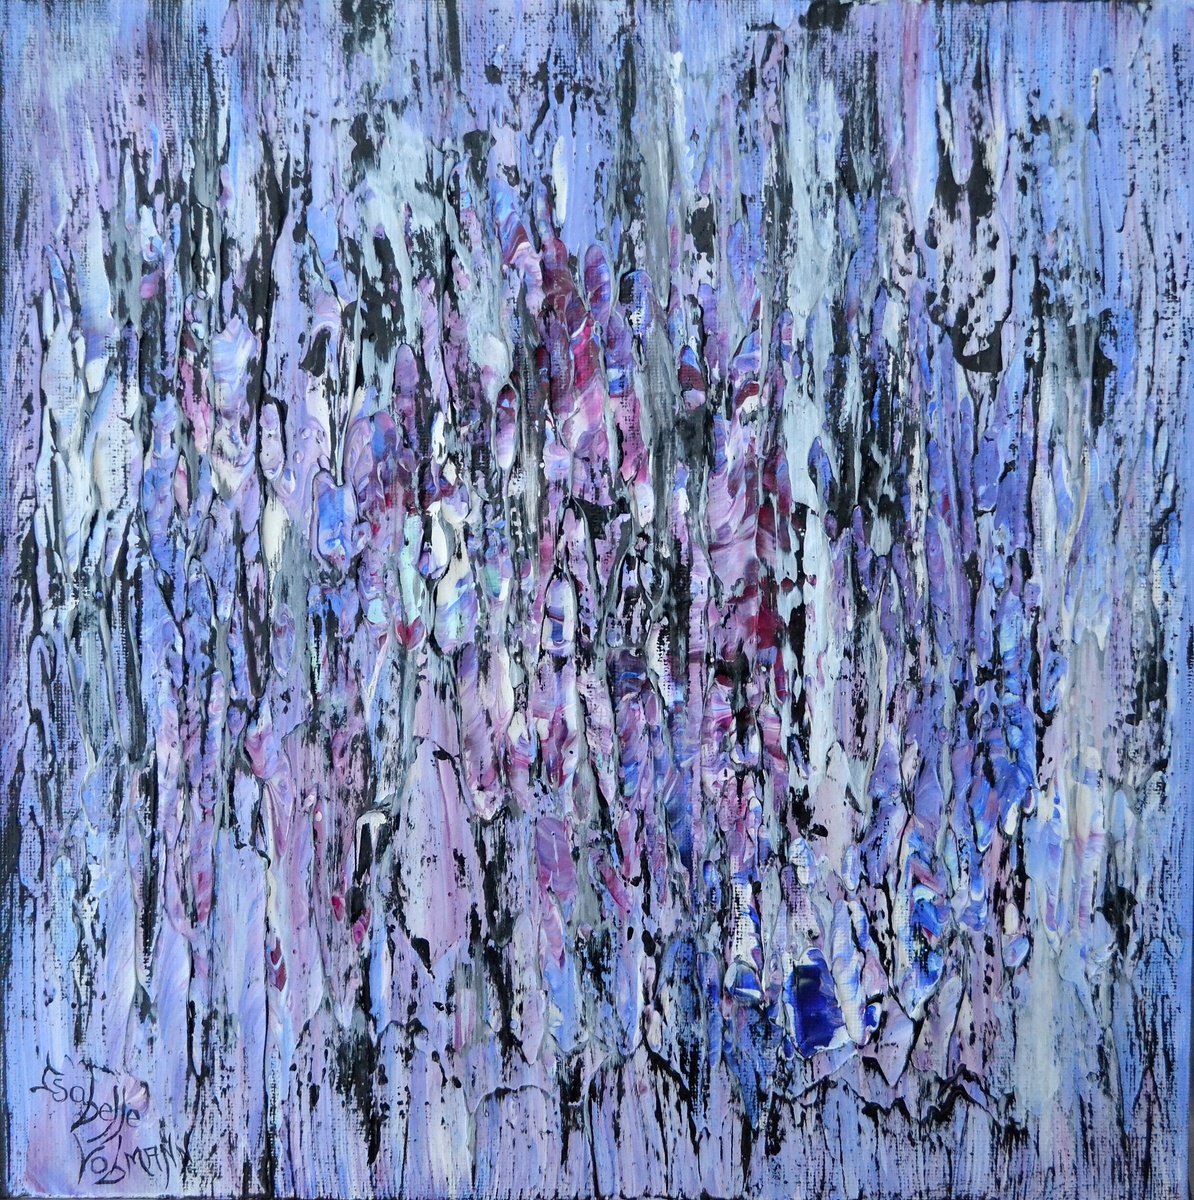 Purple rain - free shipping - textured - palette knife painting - ready to hang - home dec... by Isabelle Vobmann